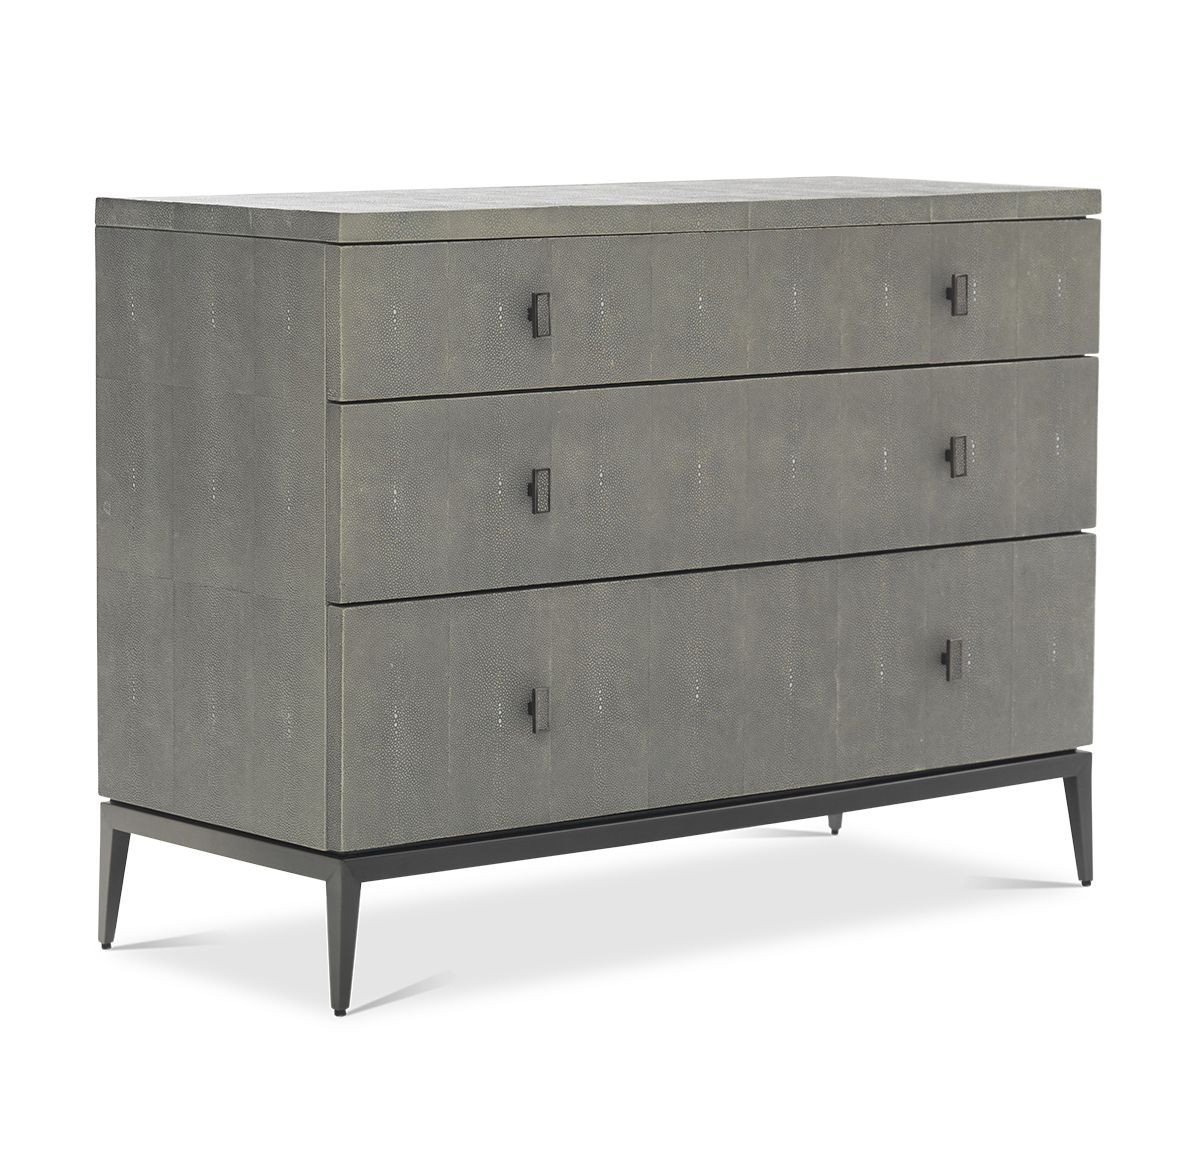 Used Lexington Bedroom Furniture Fresh solange 3 Drawer Chest Gray In 2019 Products